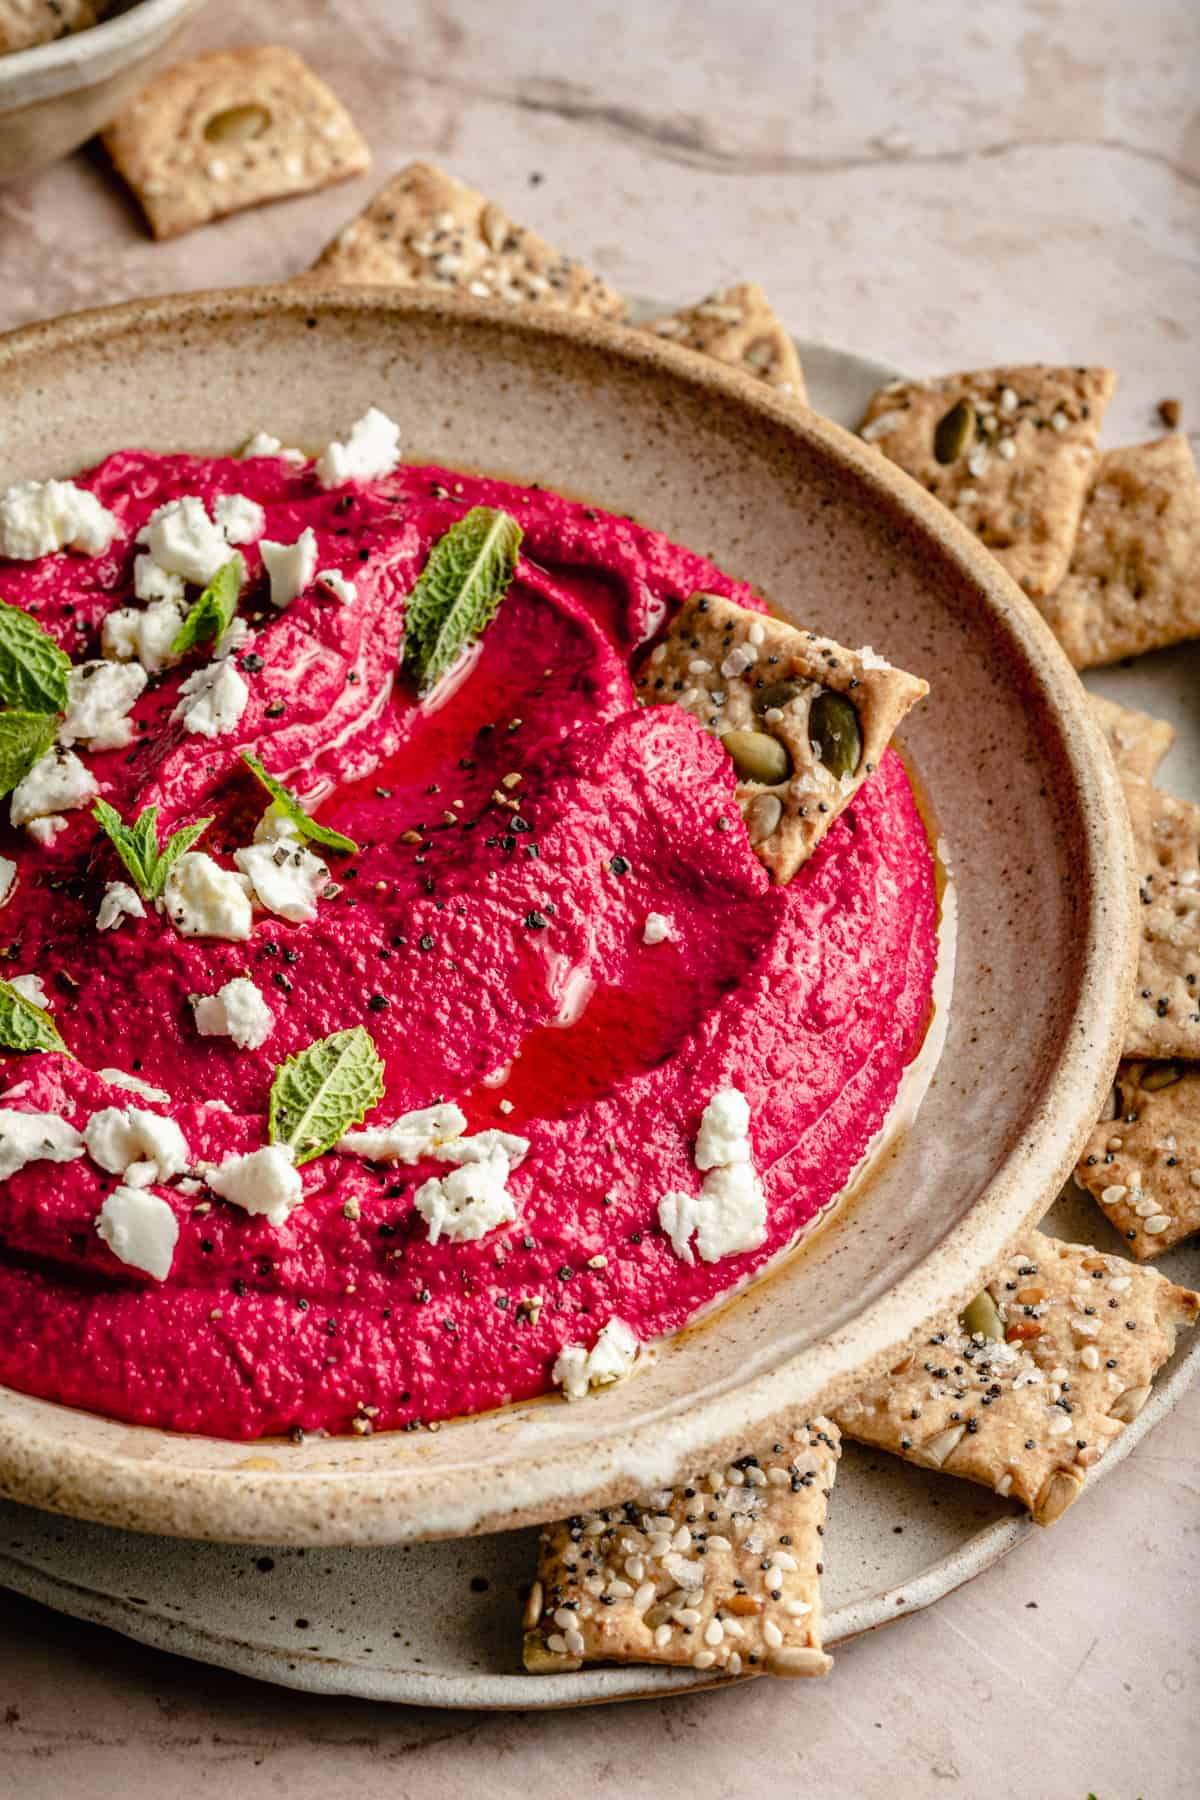 A bowl of beetroot hummus with feta mint leaves and a cracker dipping in it.